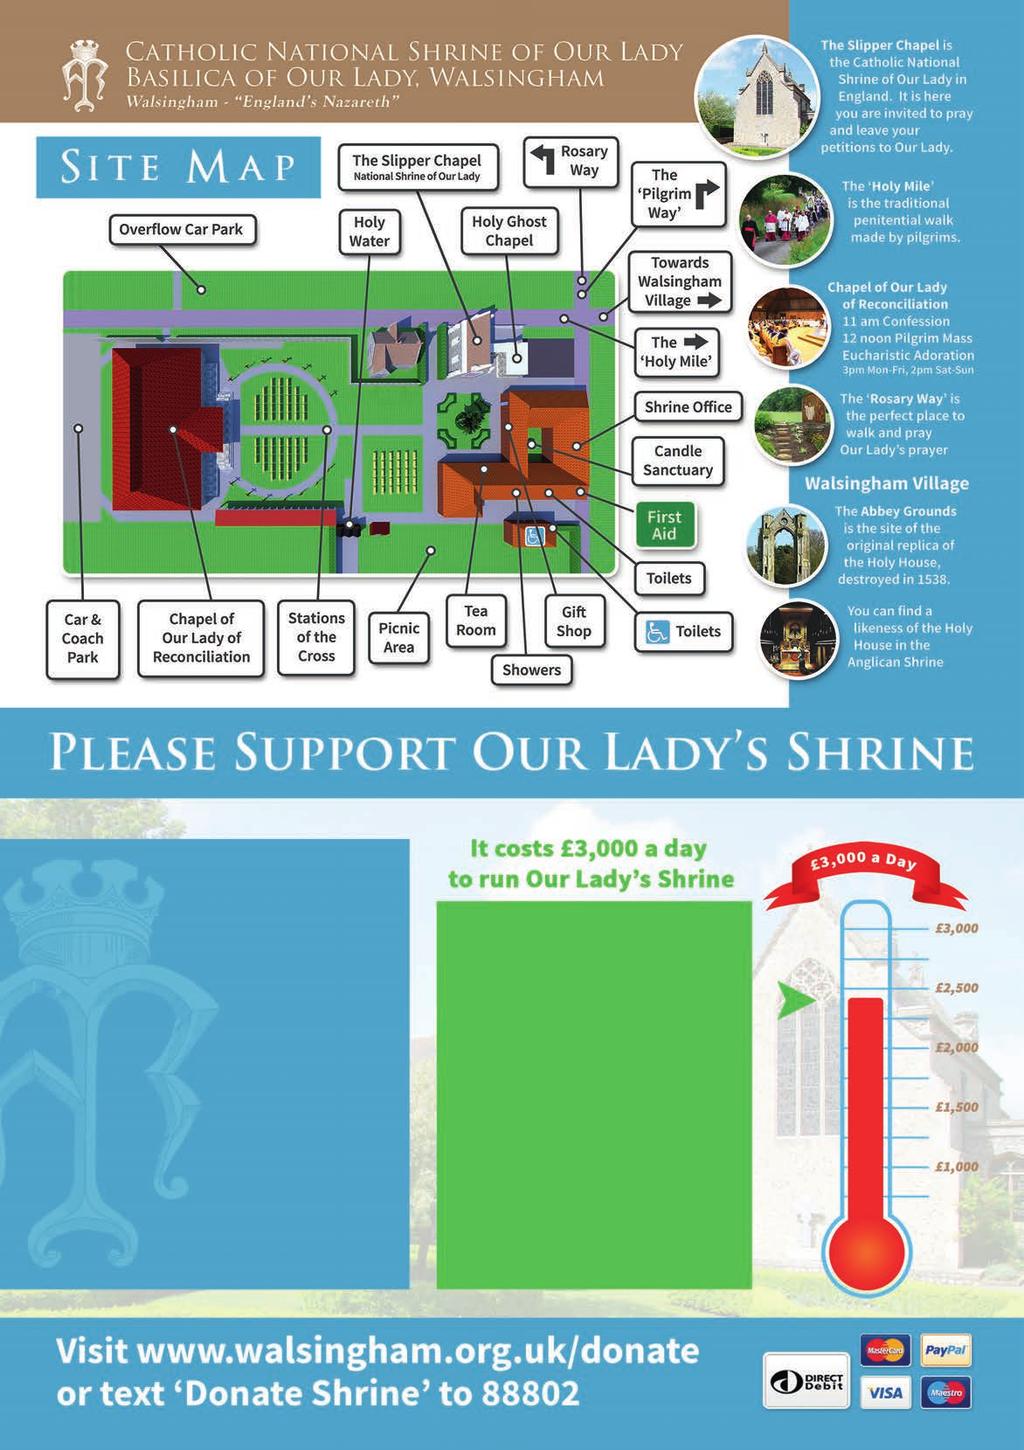 The Shrine relies completely on the generosity of her pilgrims and supporters. It costs 3,000 a day to run the Shrine, and your support is needed.